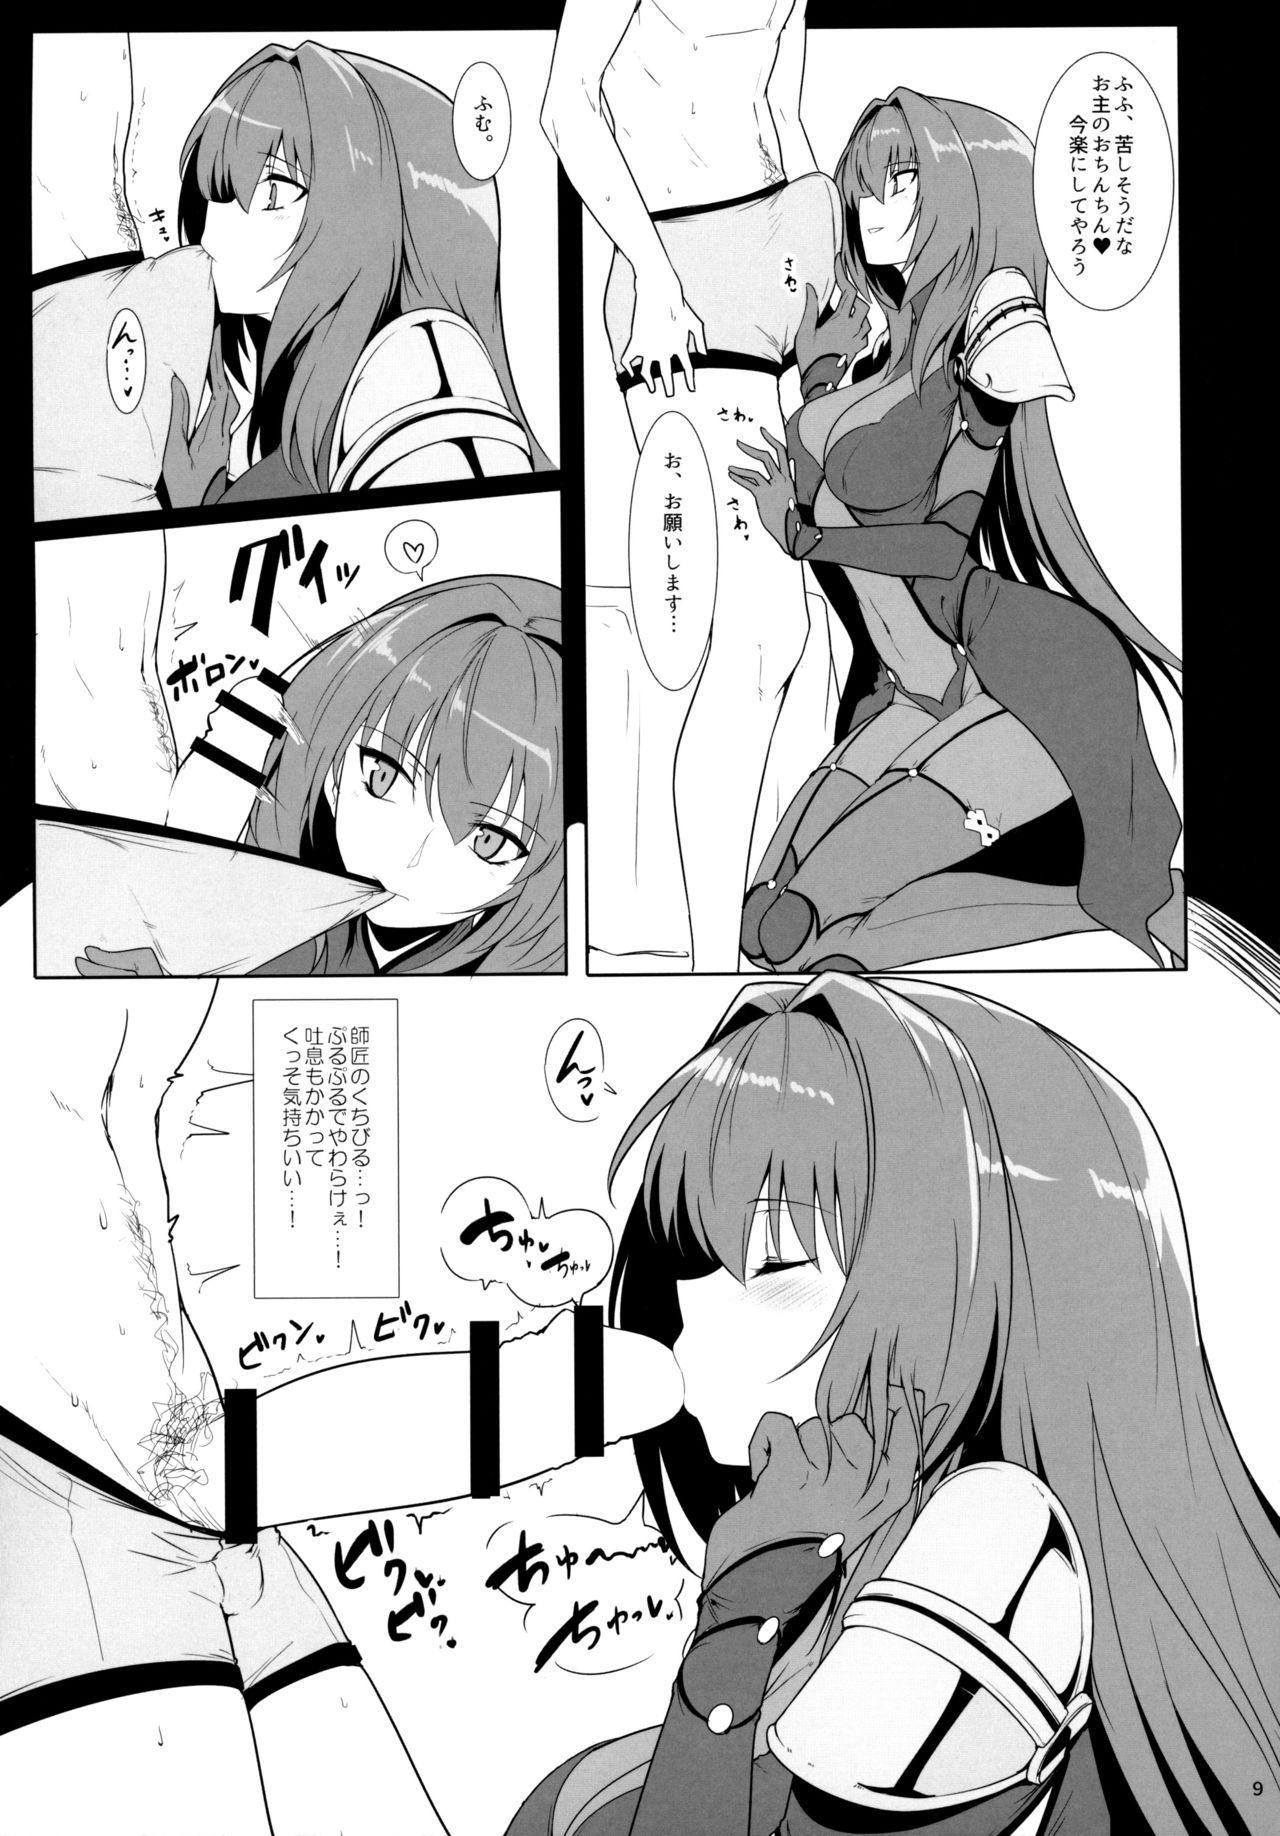 Amature Sex Tapes AH! MY MISTRESS! - Fate grand order Branquinha - Page 9